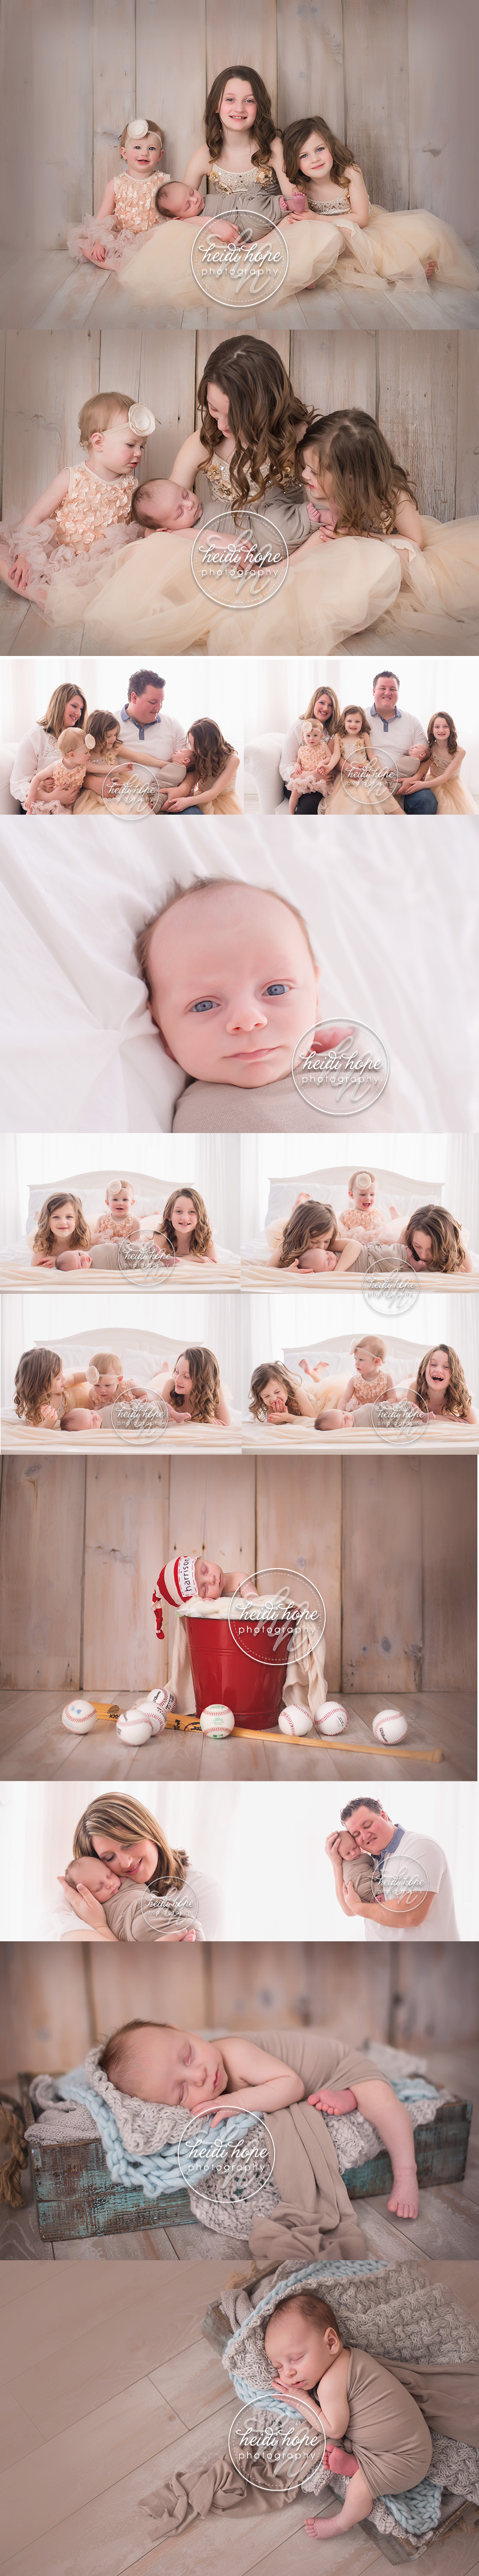 newborn boy with 3 big sisters 1 month old by heidi hope photography